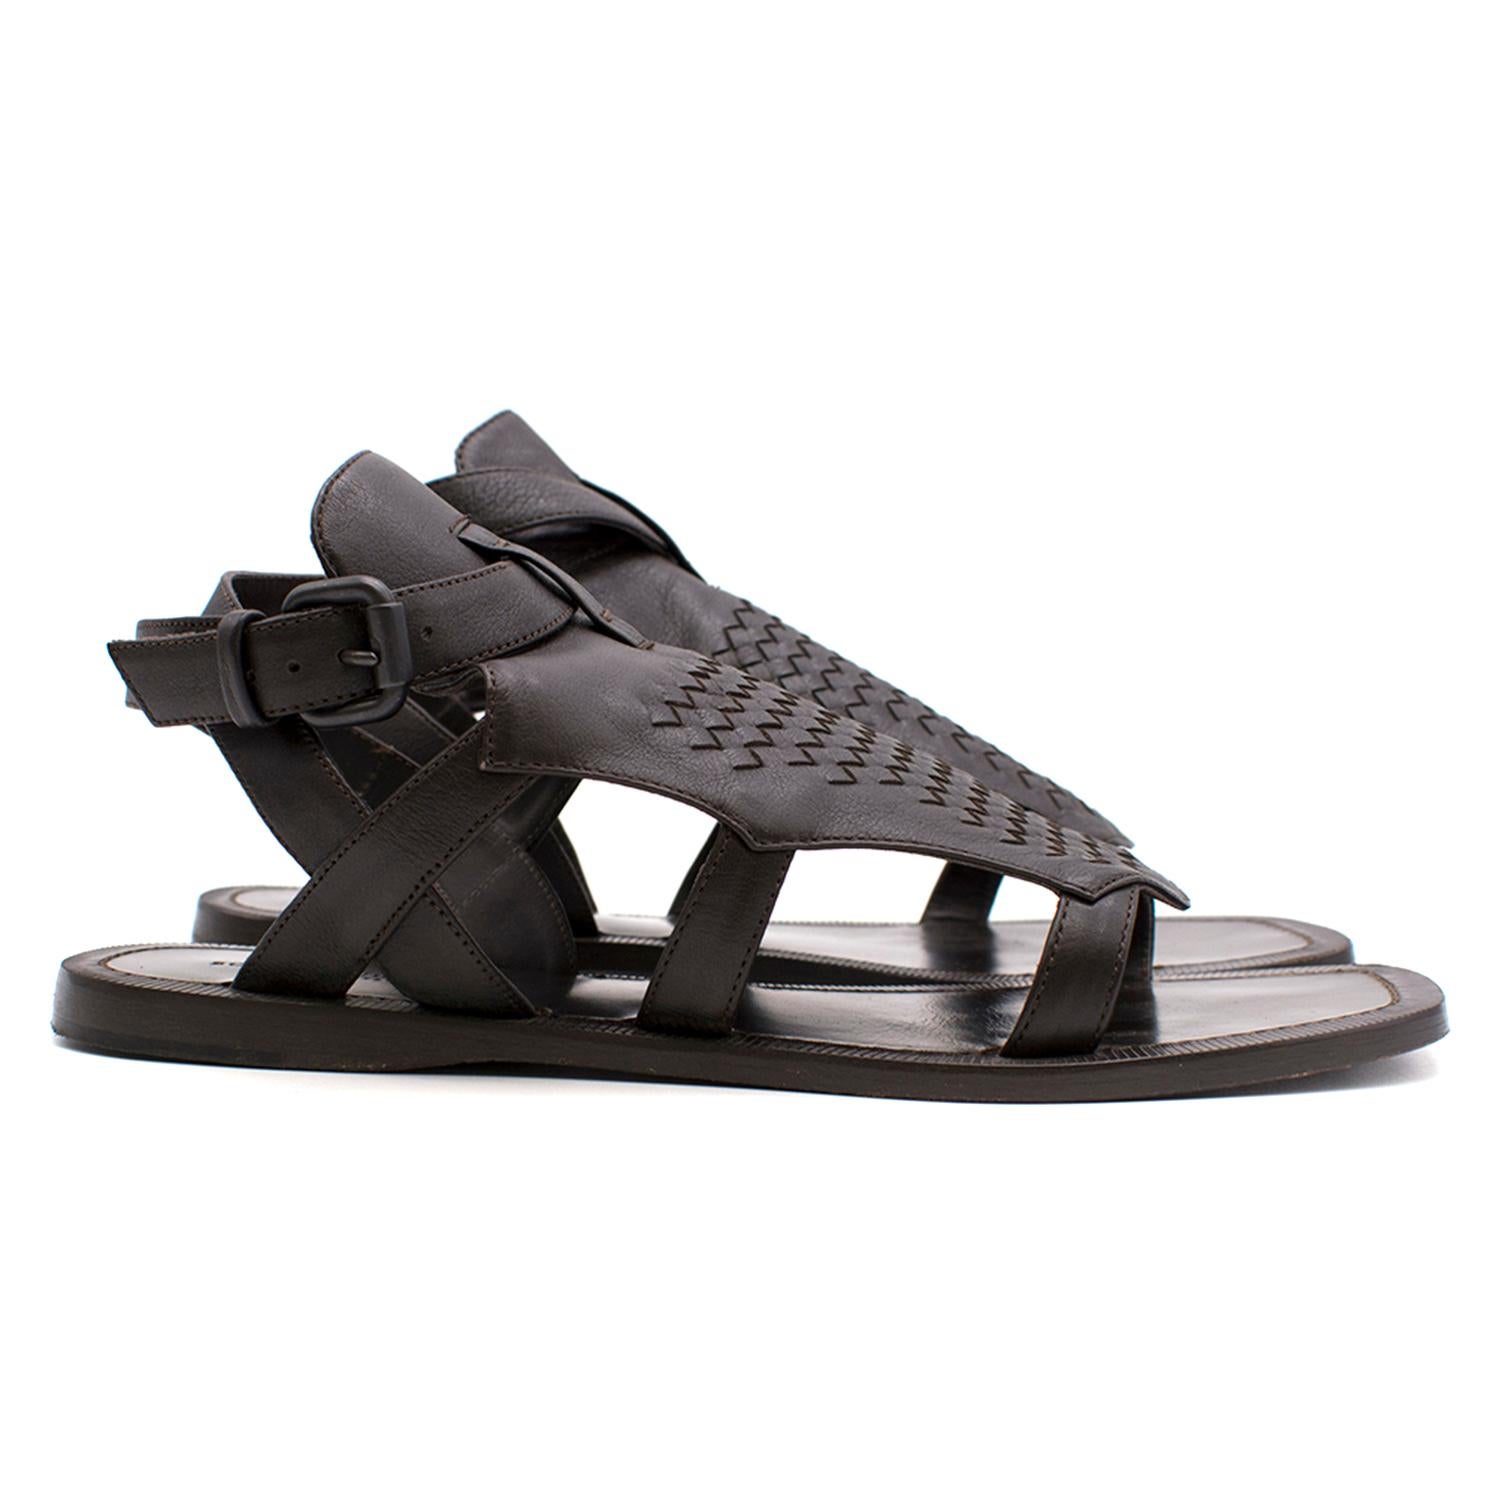 Bottega Veneta woven leather gladiator sandal in espresso with signature woven detail and wraparound buckled ankle strap.

Fabrics: Leather.

Please note, these items are pre-owned and may show signs of being stored even when unworn and unused. This